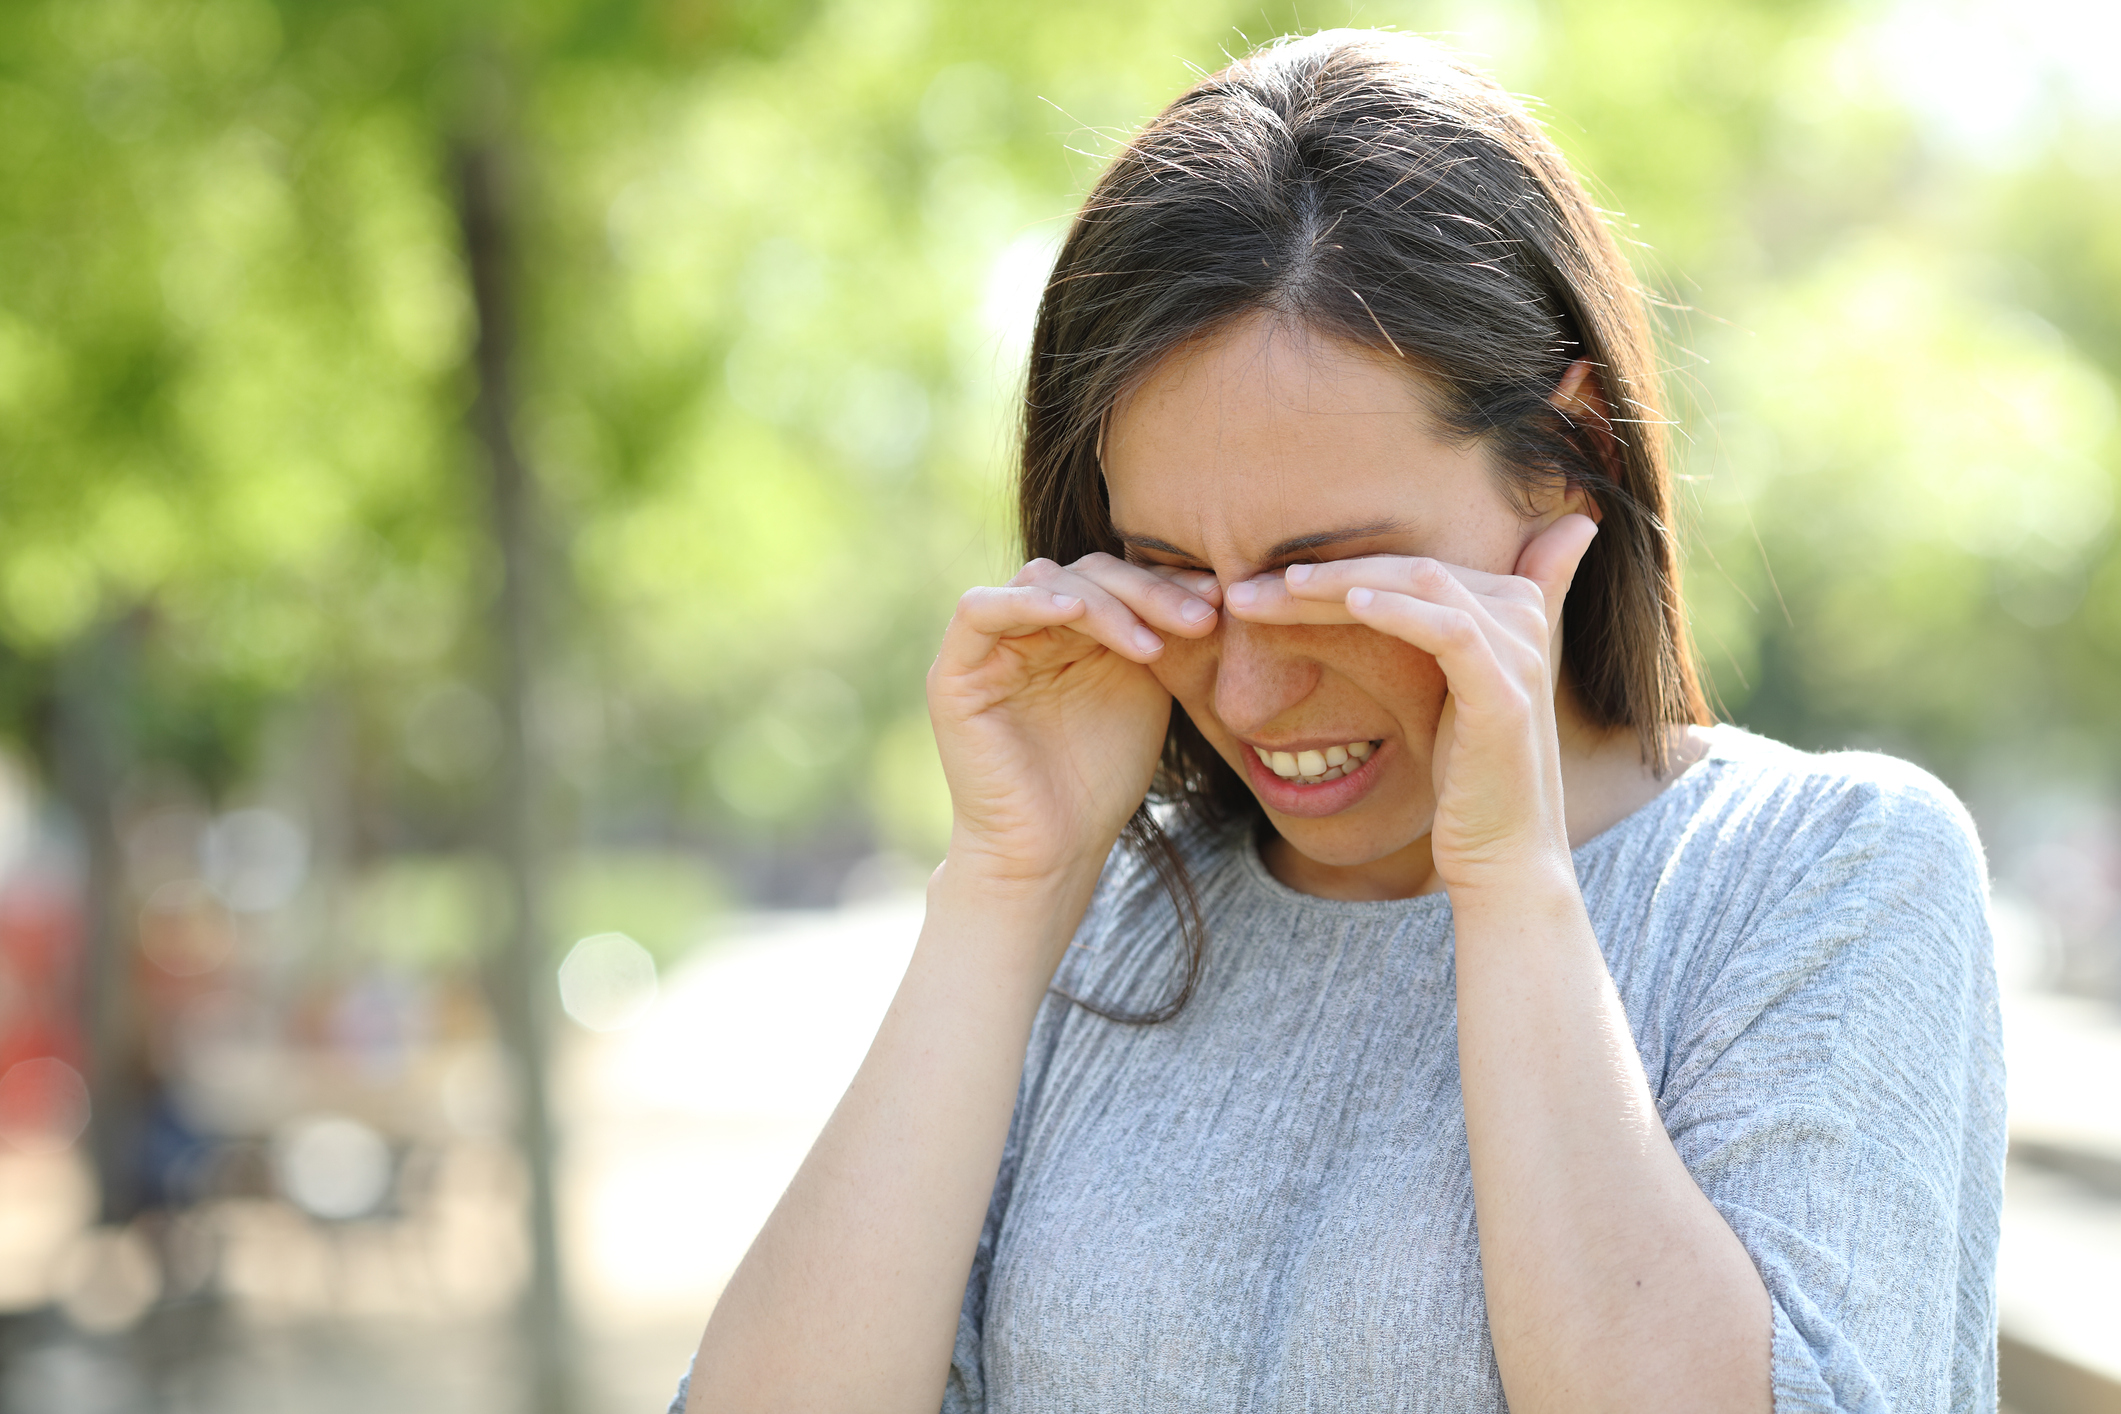 A woman rubbing her eyes outdoors